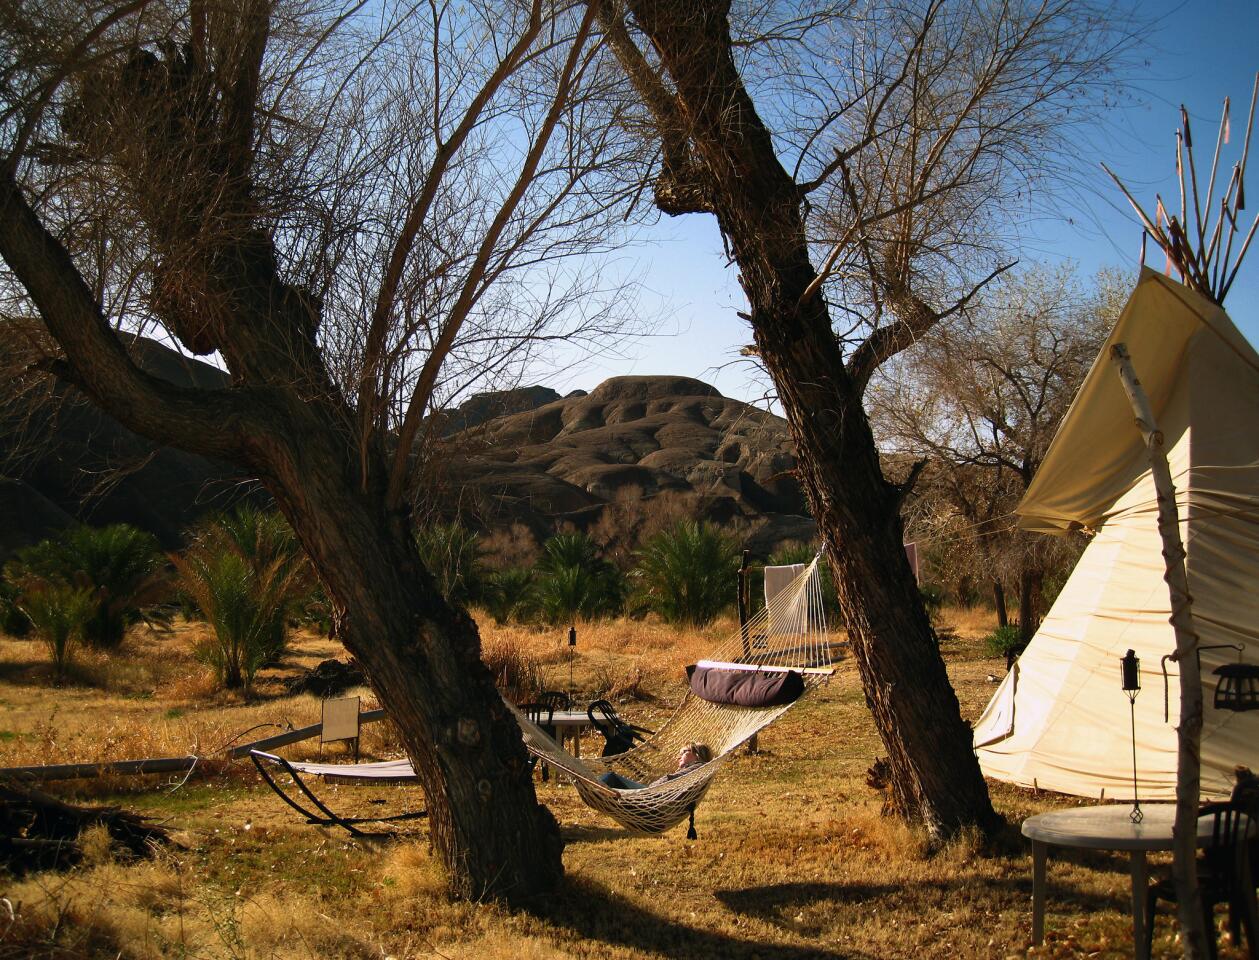 We had checked in about 1 a.m. after a five-hour drive from Los Angeles. Our domicile for two nights in mid-February was one of three tepees on the grounds of China Ranch, a date farm in the tiny town of Tecopa just outside Death Valley National Park.